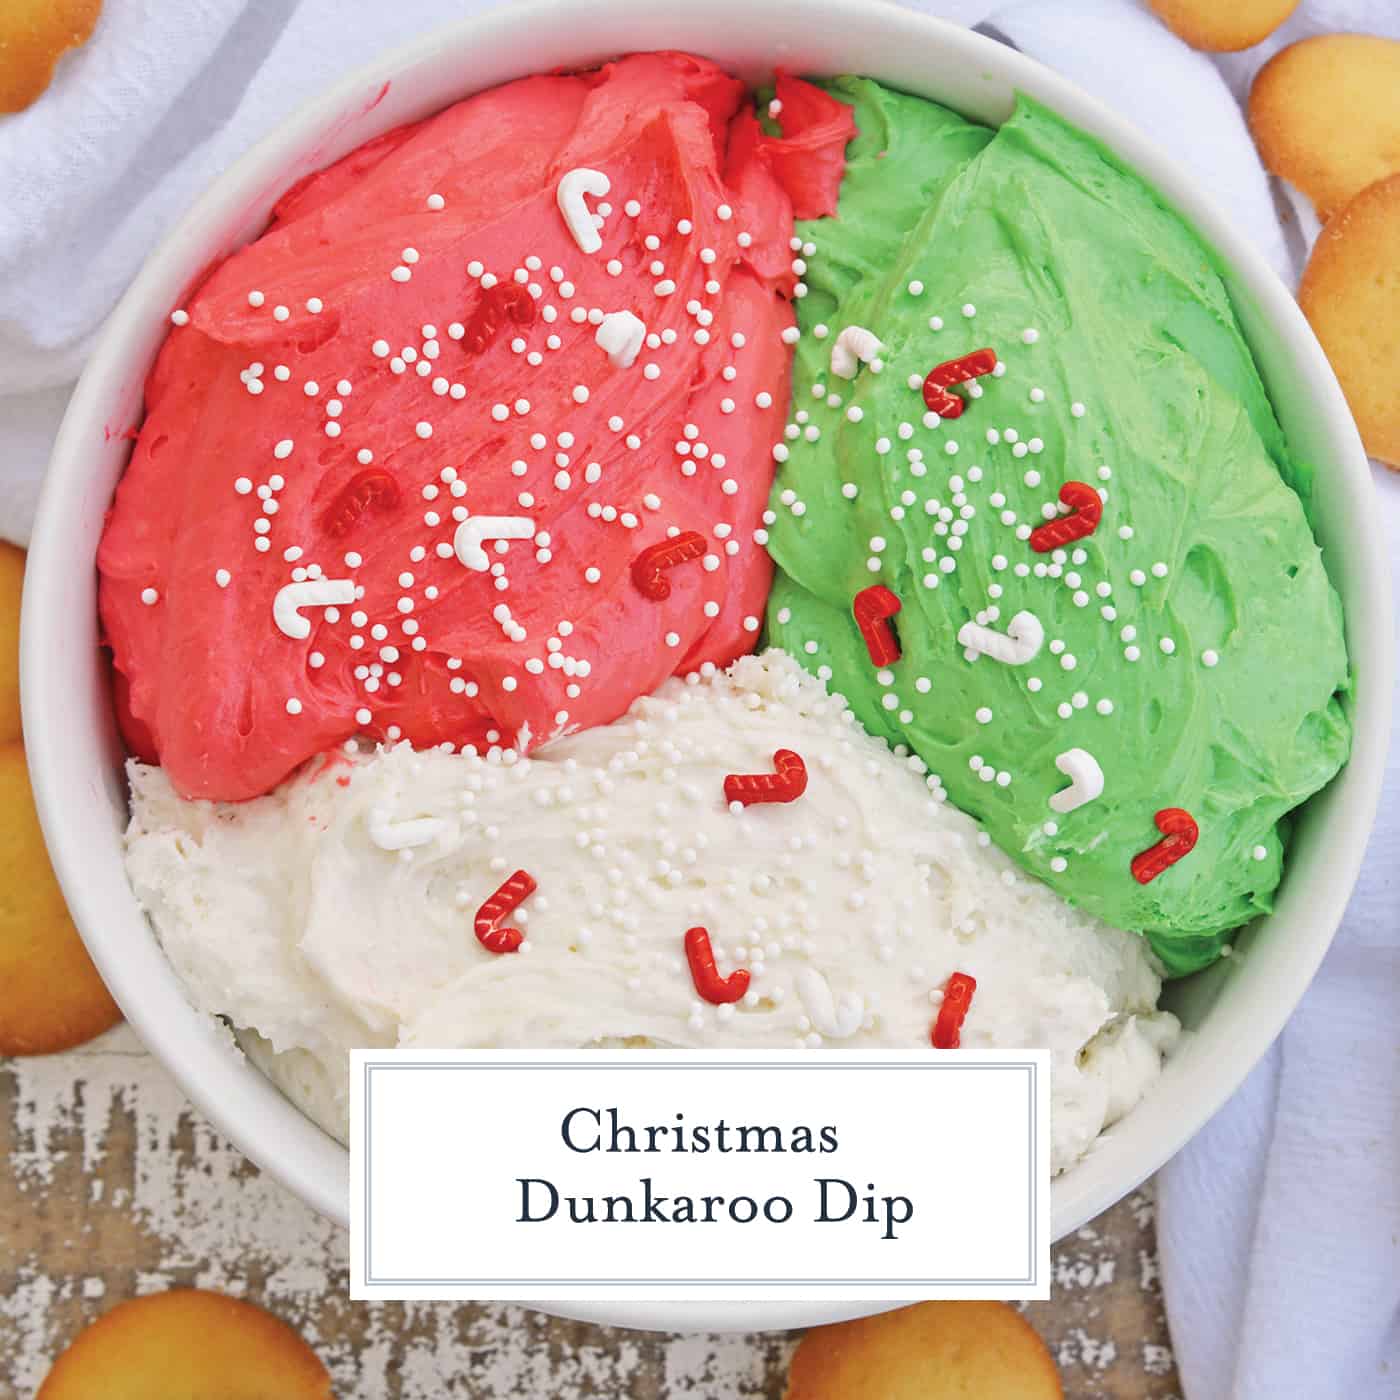 This Christmas Dunkaroo Dip recipe is a quick, sweet and festive holiday dessert dip that the entire family will love. Ready in just a few minutes! #dunkaroodiprecipe #dessertdips #howtomakedunkaroodip www.savoryexperiments.com